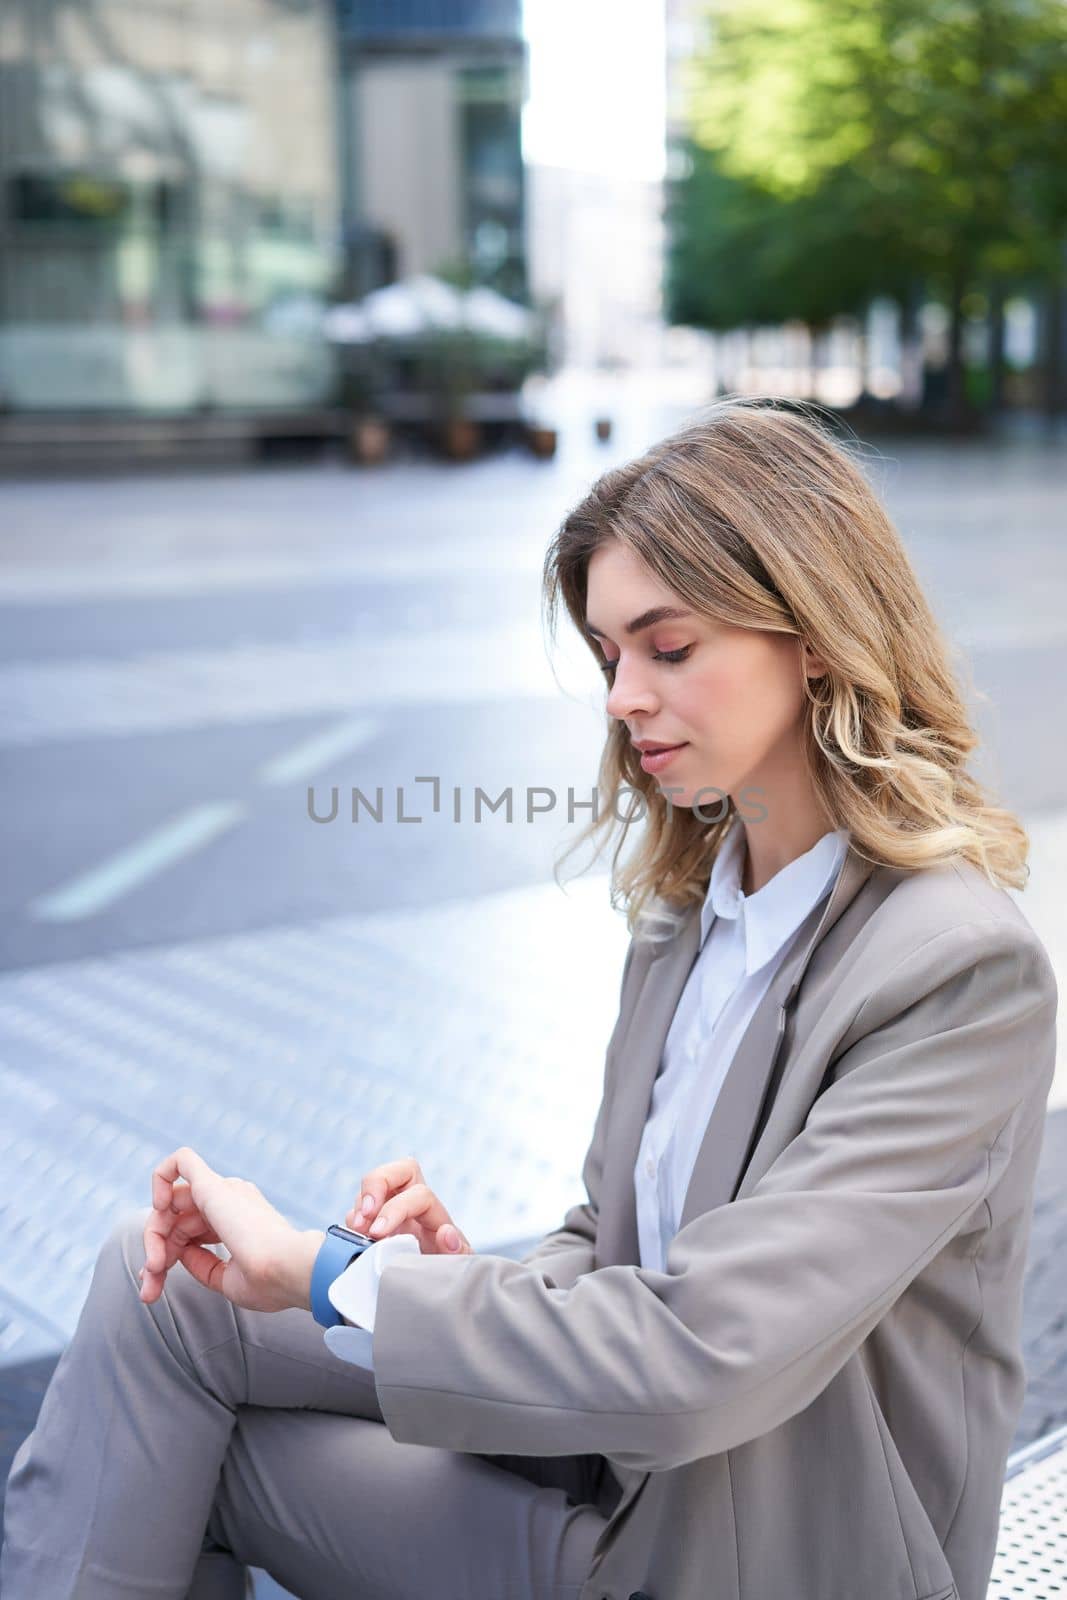 Vertical shot of businesswoman looking at time on her watch, waiting for coworker, having a business meeting outdoors.